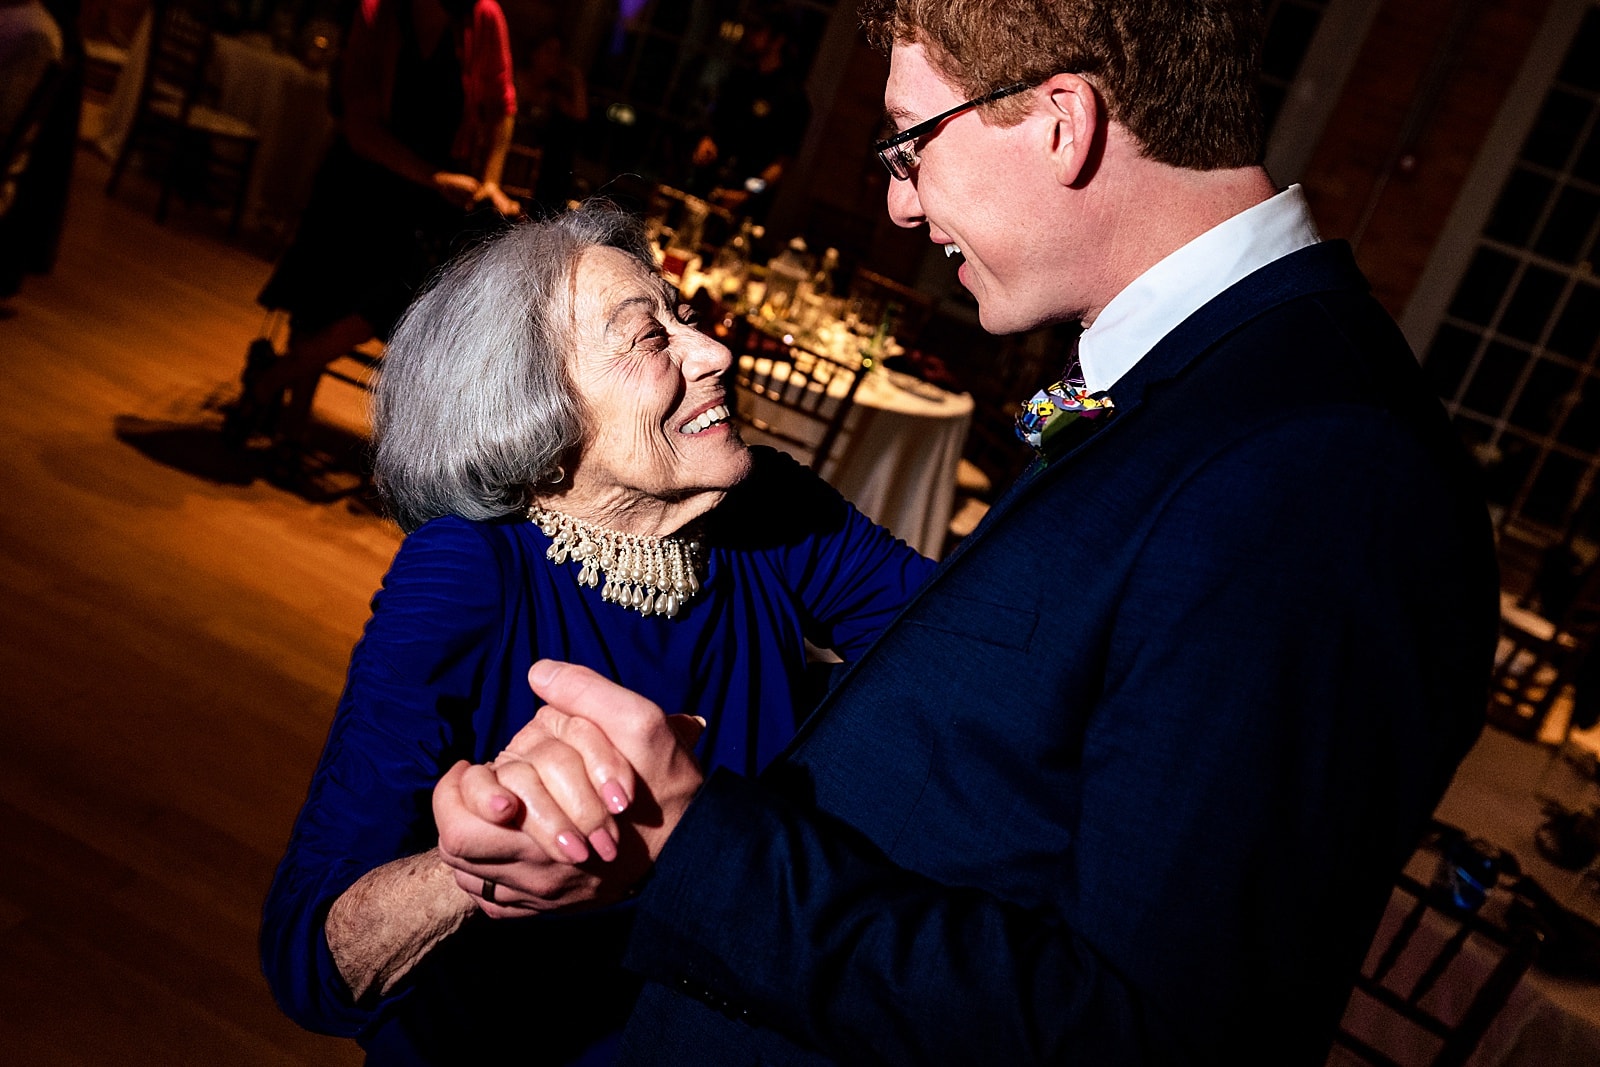 Groom dances with his grandmother at his wedding